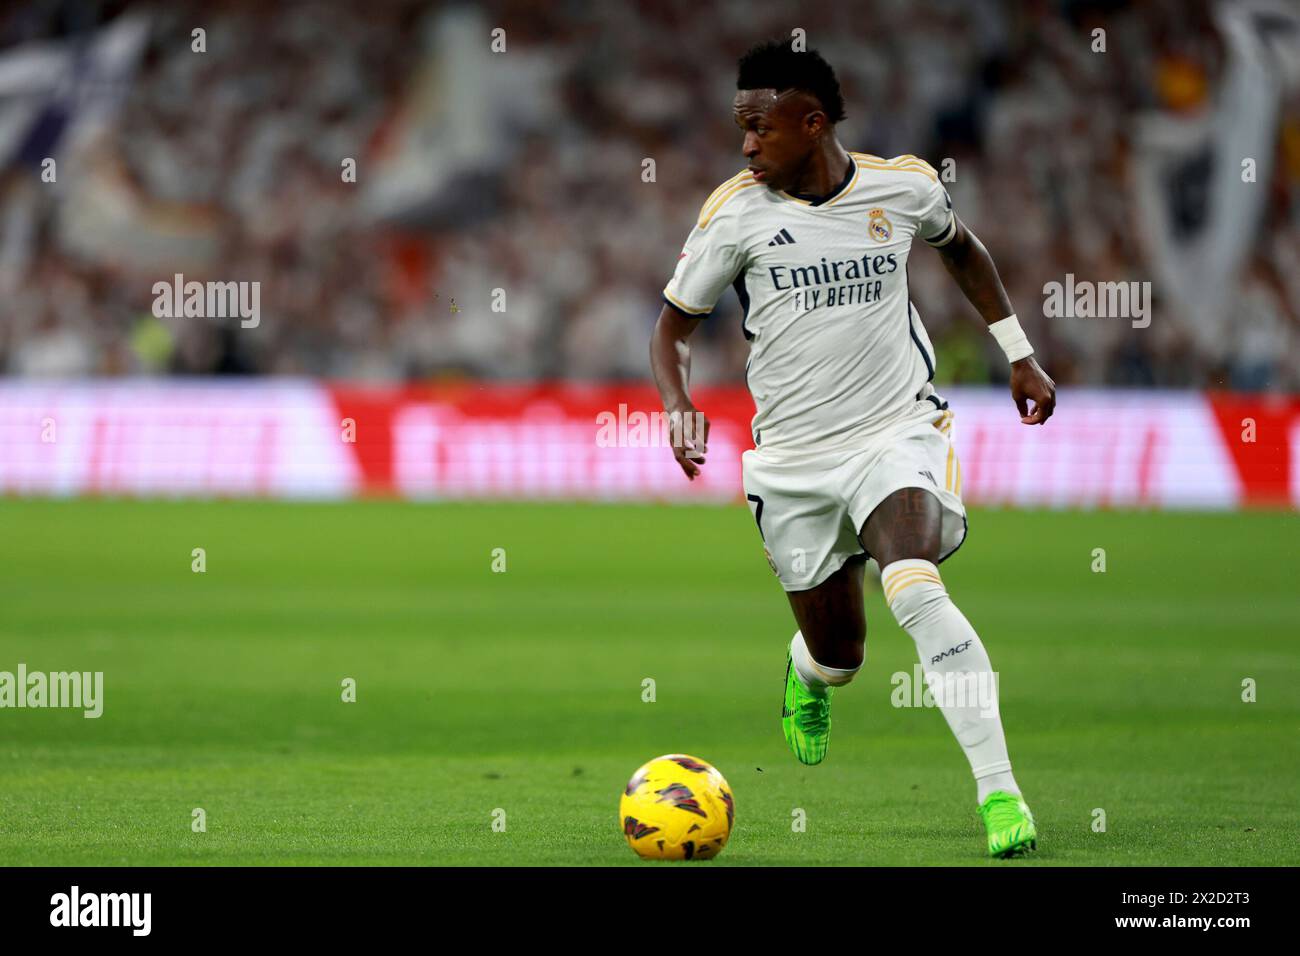 Madrid, Kingdom of Spain; 04/21/2024.- Real Madrid beats Barcelona 3-2 on matchday 32 of the Spanish Soccer League. Real Madrid with goals from Vinicius Jr. 12' (P), Lucas Vazque 73' and Jude Bellingham 90  1 wins the derby against Barcelona who scored two goals, Andreas Christensen 6' and Fermin Lopez Marin 69' Match held at the Santiago Bernabeu Stadium in the capital of the Kingdom of Spain. Photo: Juan Carlos Rojas Stock Photo